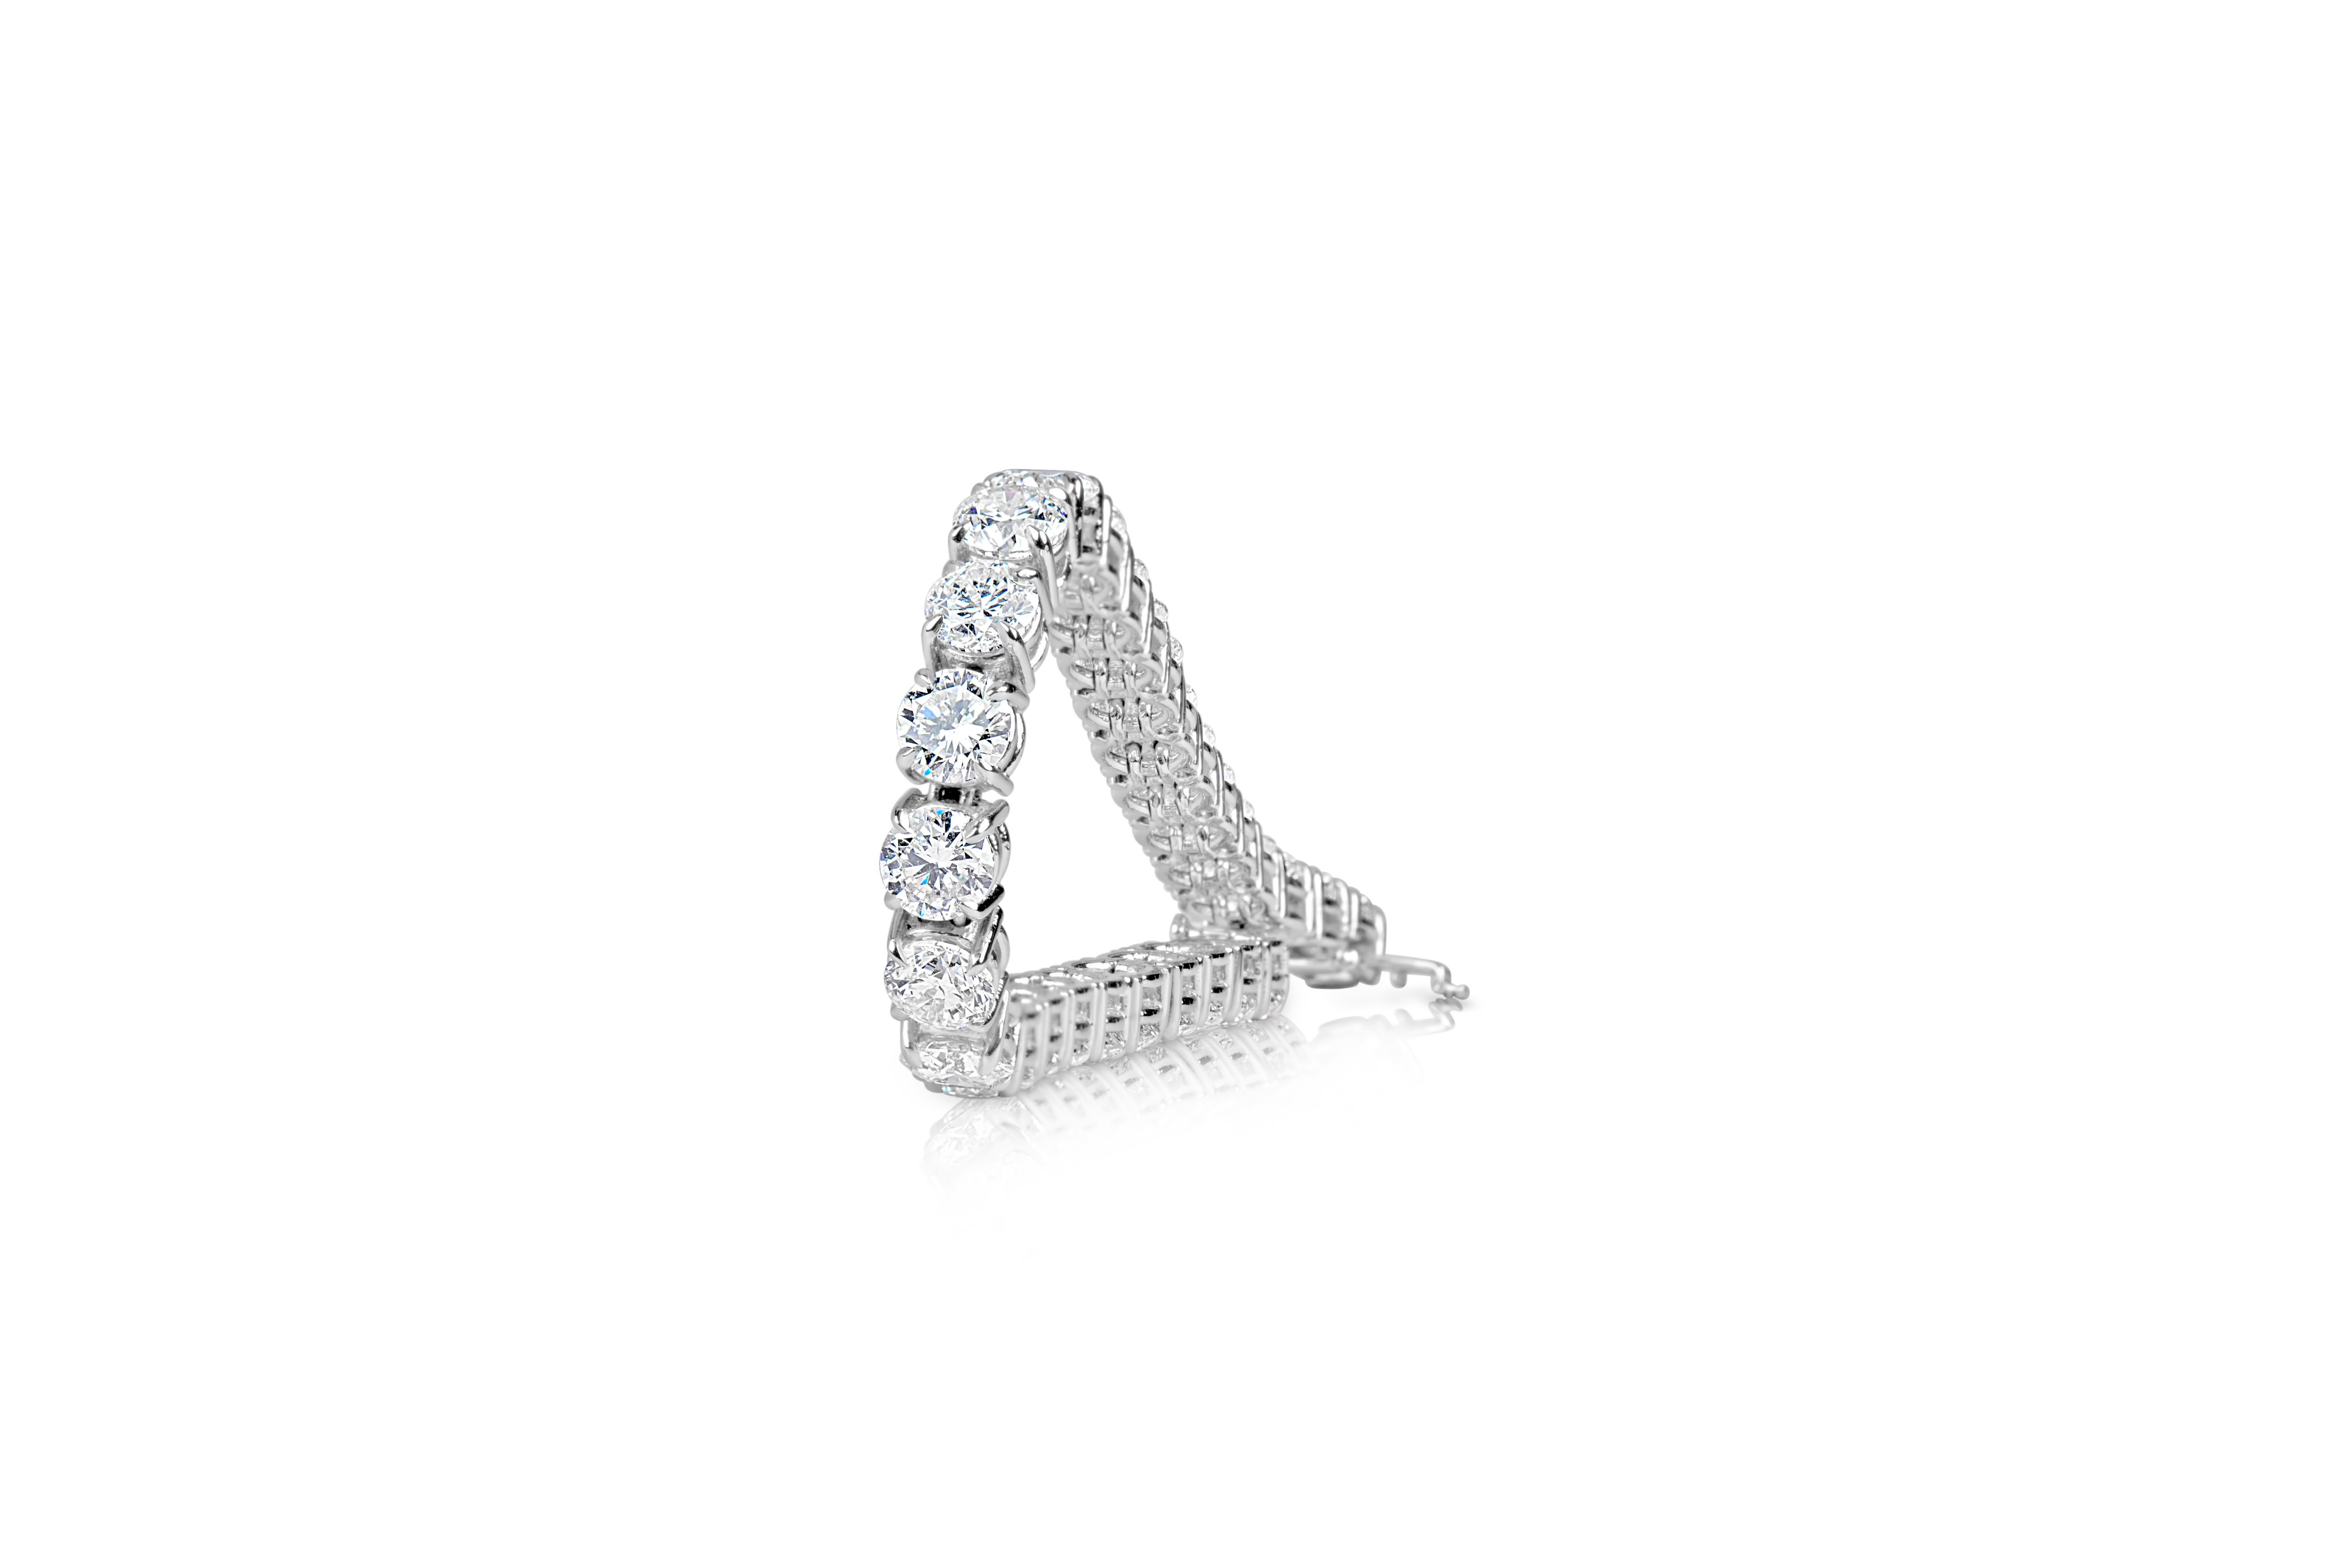 Diamond Tennis Bracelet featuring:
Gold: 18K White Gold
Diamond Count: 33
Diamond Weight: 16 Cts 
We manufacture these tennis bracelets
Minimum 16 Carats, may fluctuate to more weight
DM for more info  
